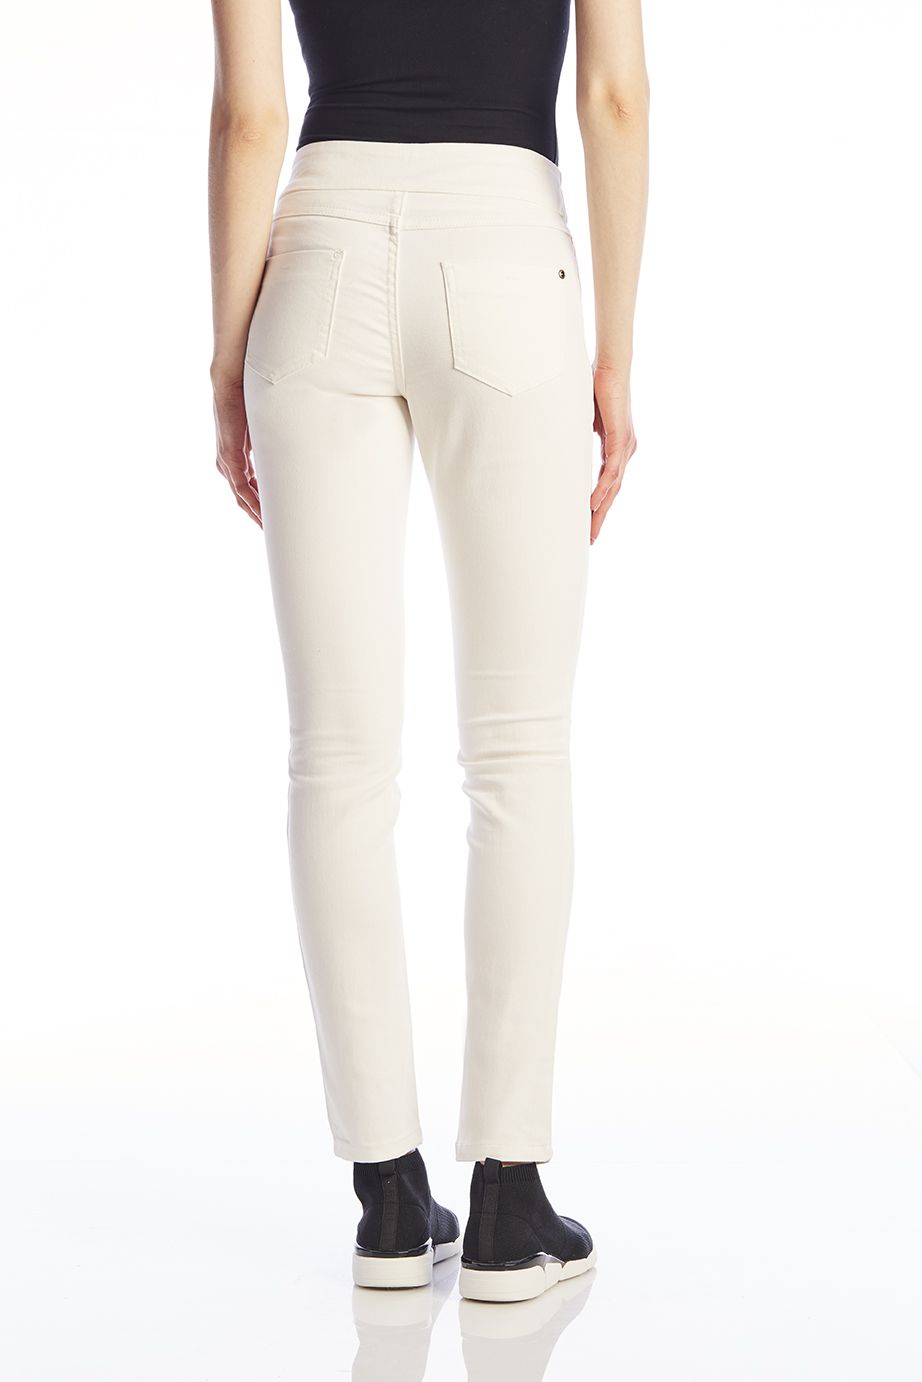 UP Womens The ultimate SKINNY 31" Pants 64632